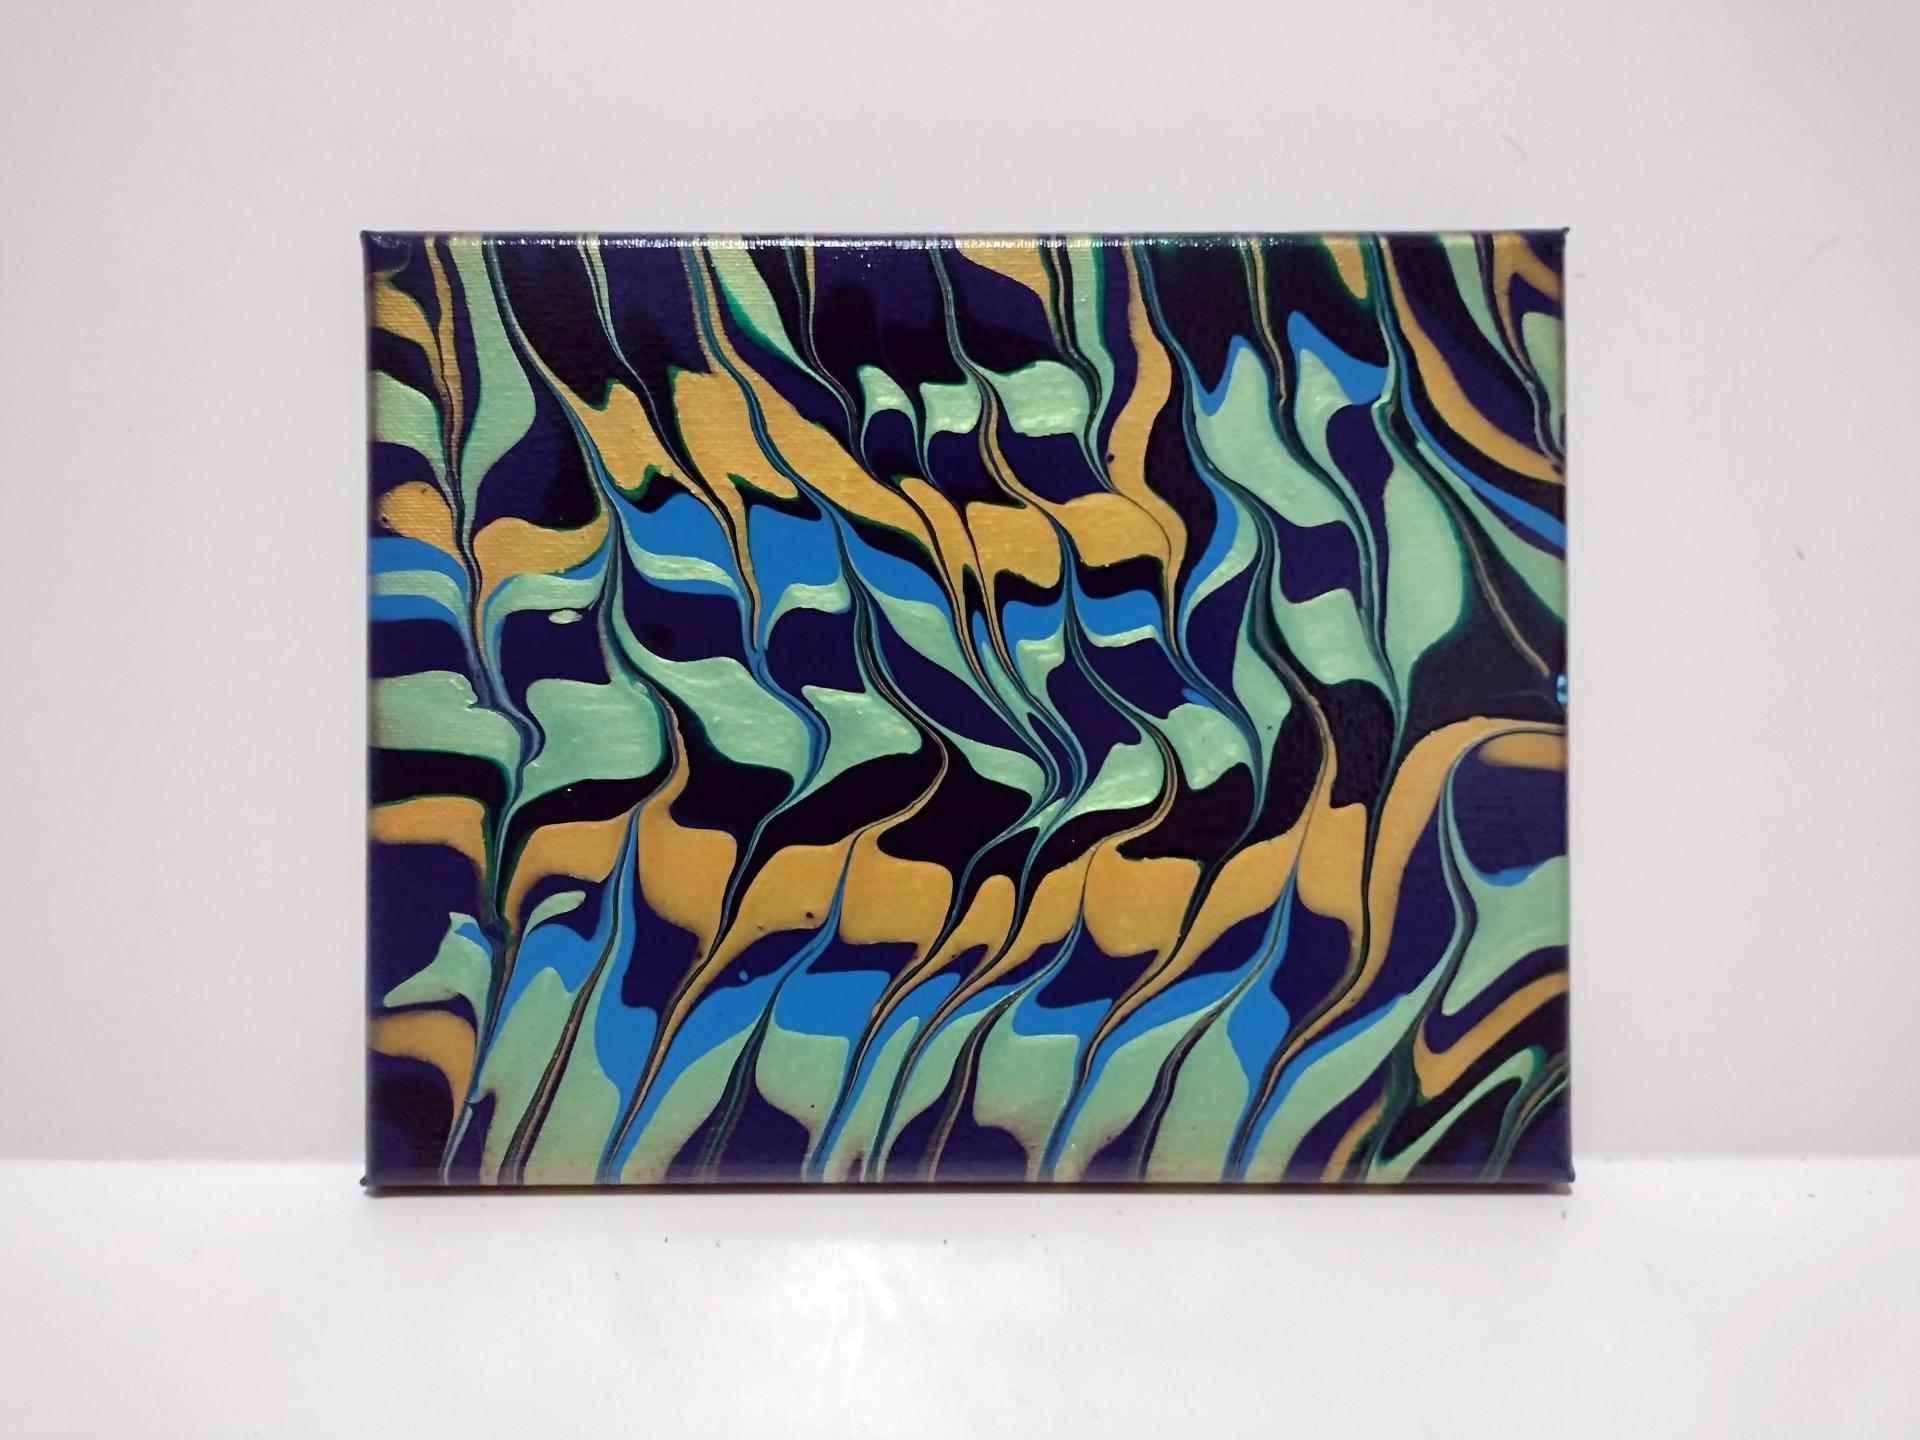 Pearlized Psychedelic Abstract Original Acrylic Painting, 8" x 10"